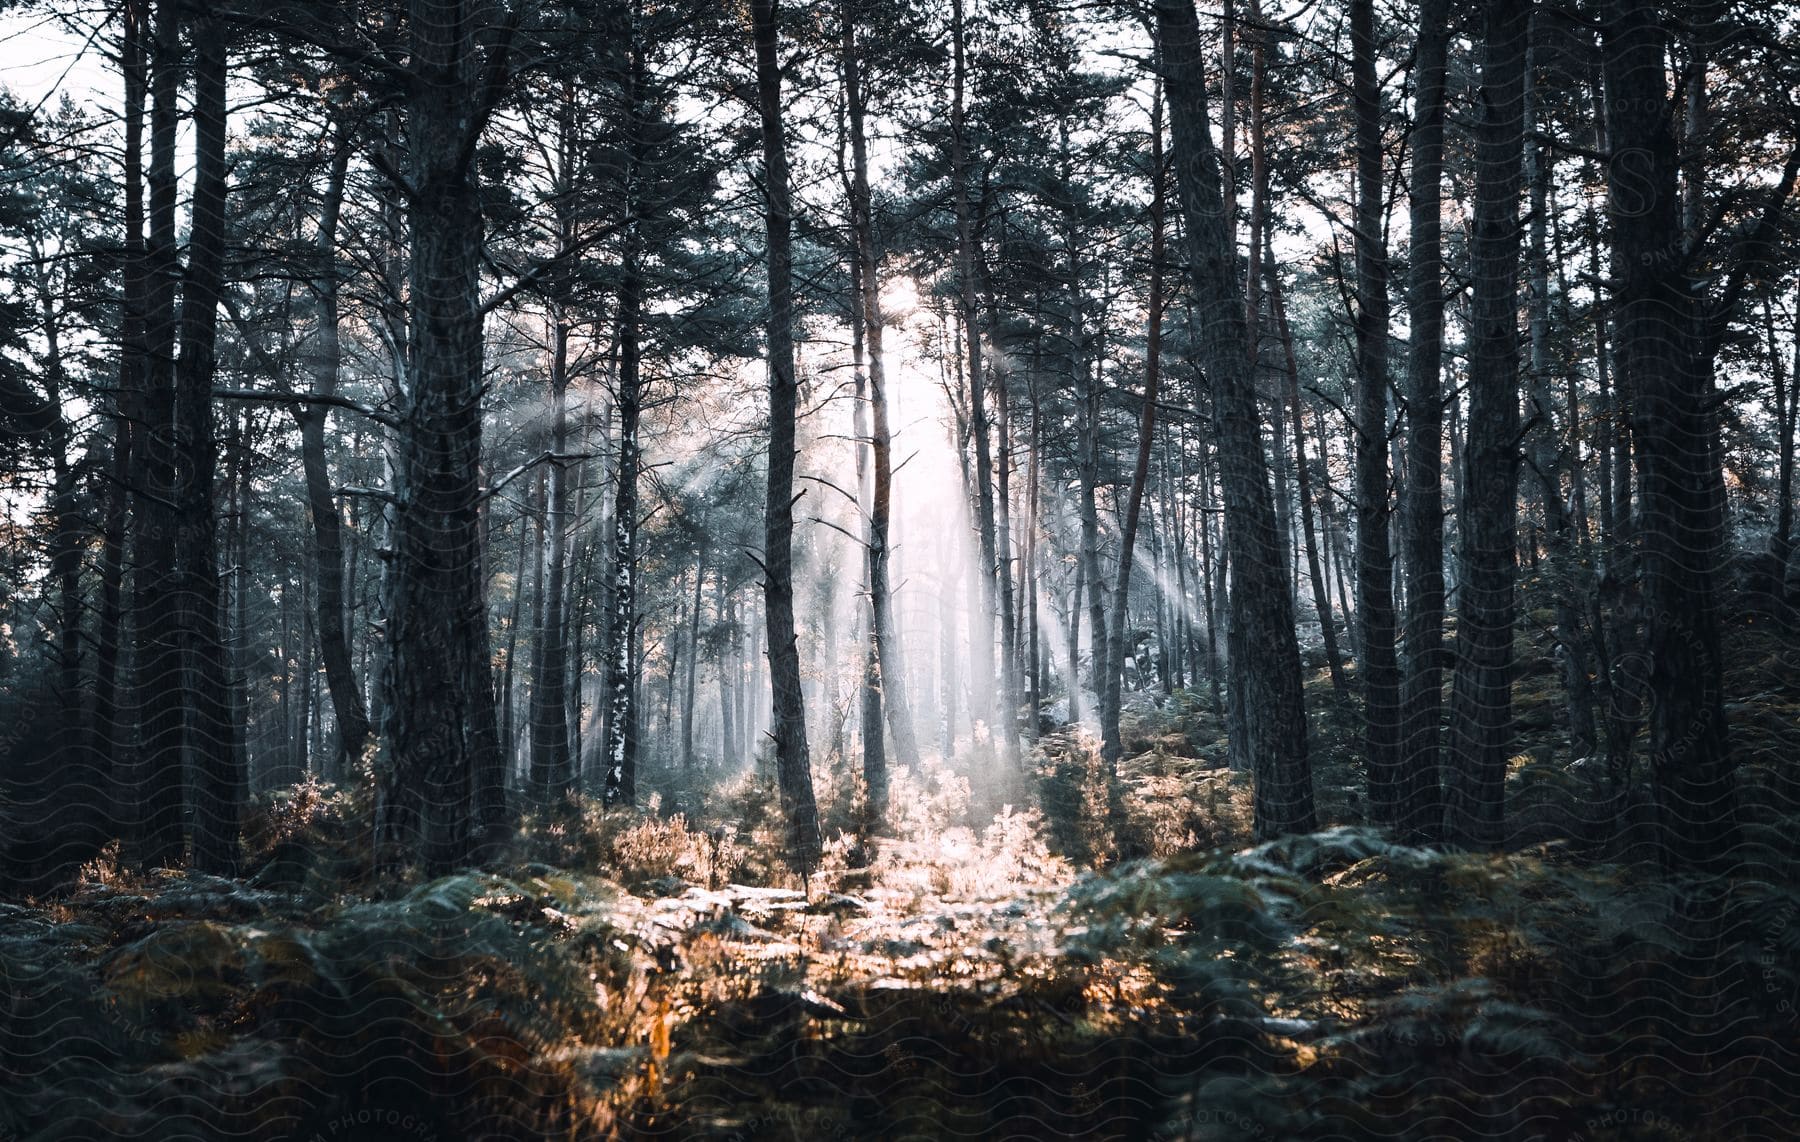 A tranquil woodland scene with trees and sunlight filtering through